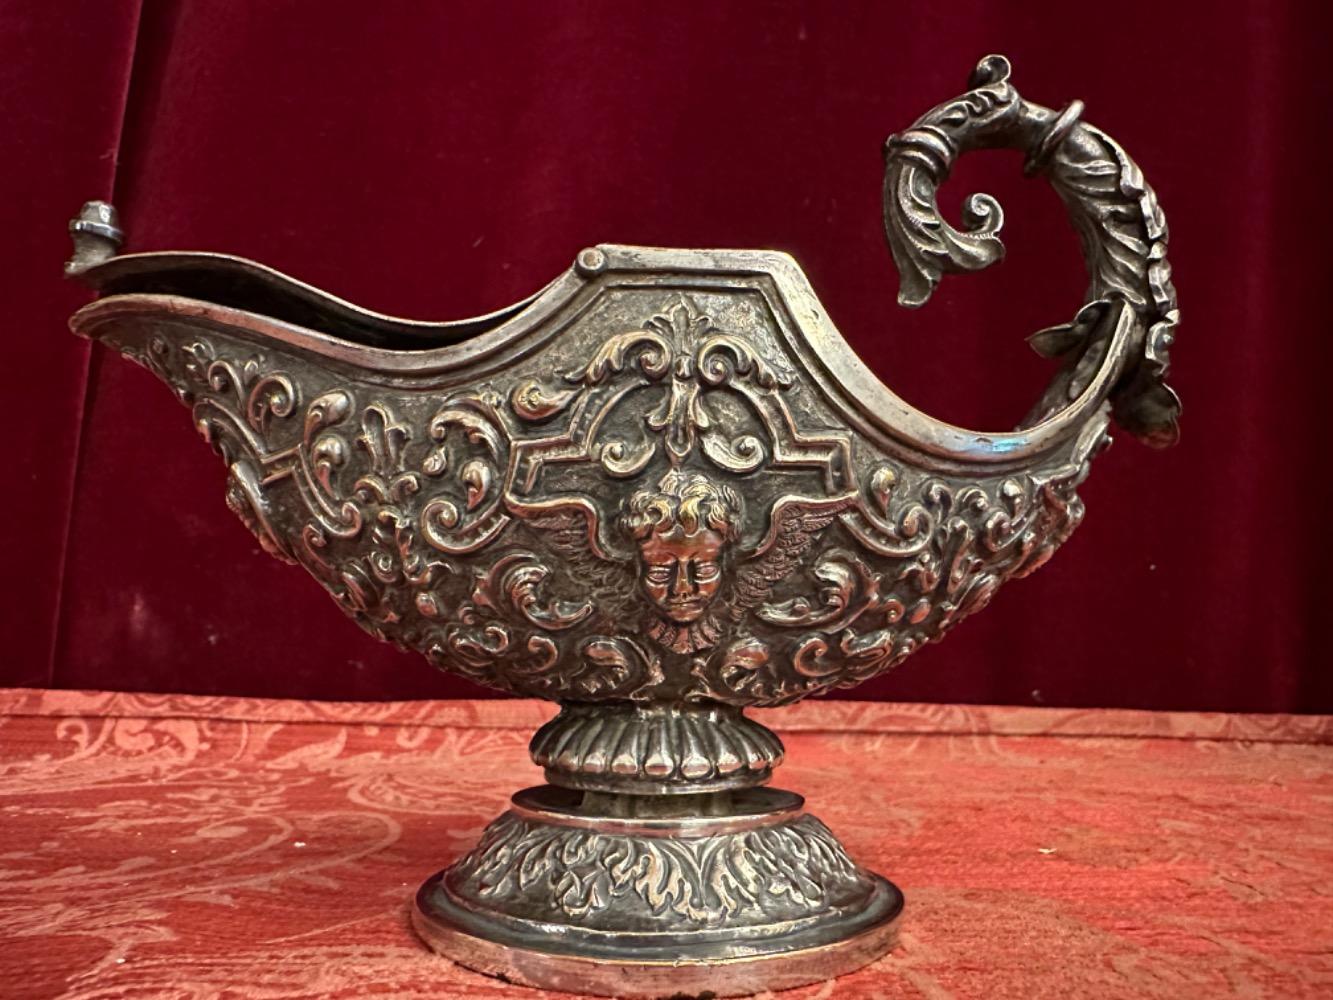 1 Baroque - Style Silver Boat With Spoon